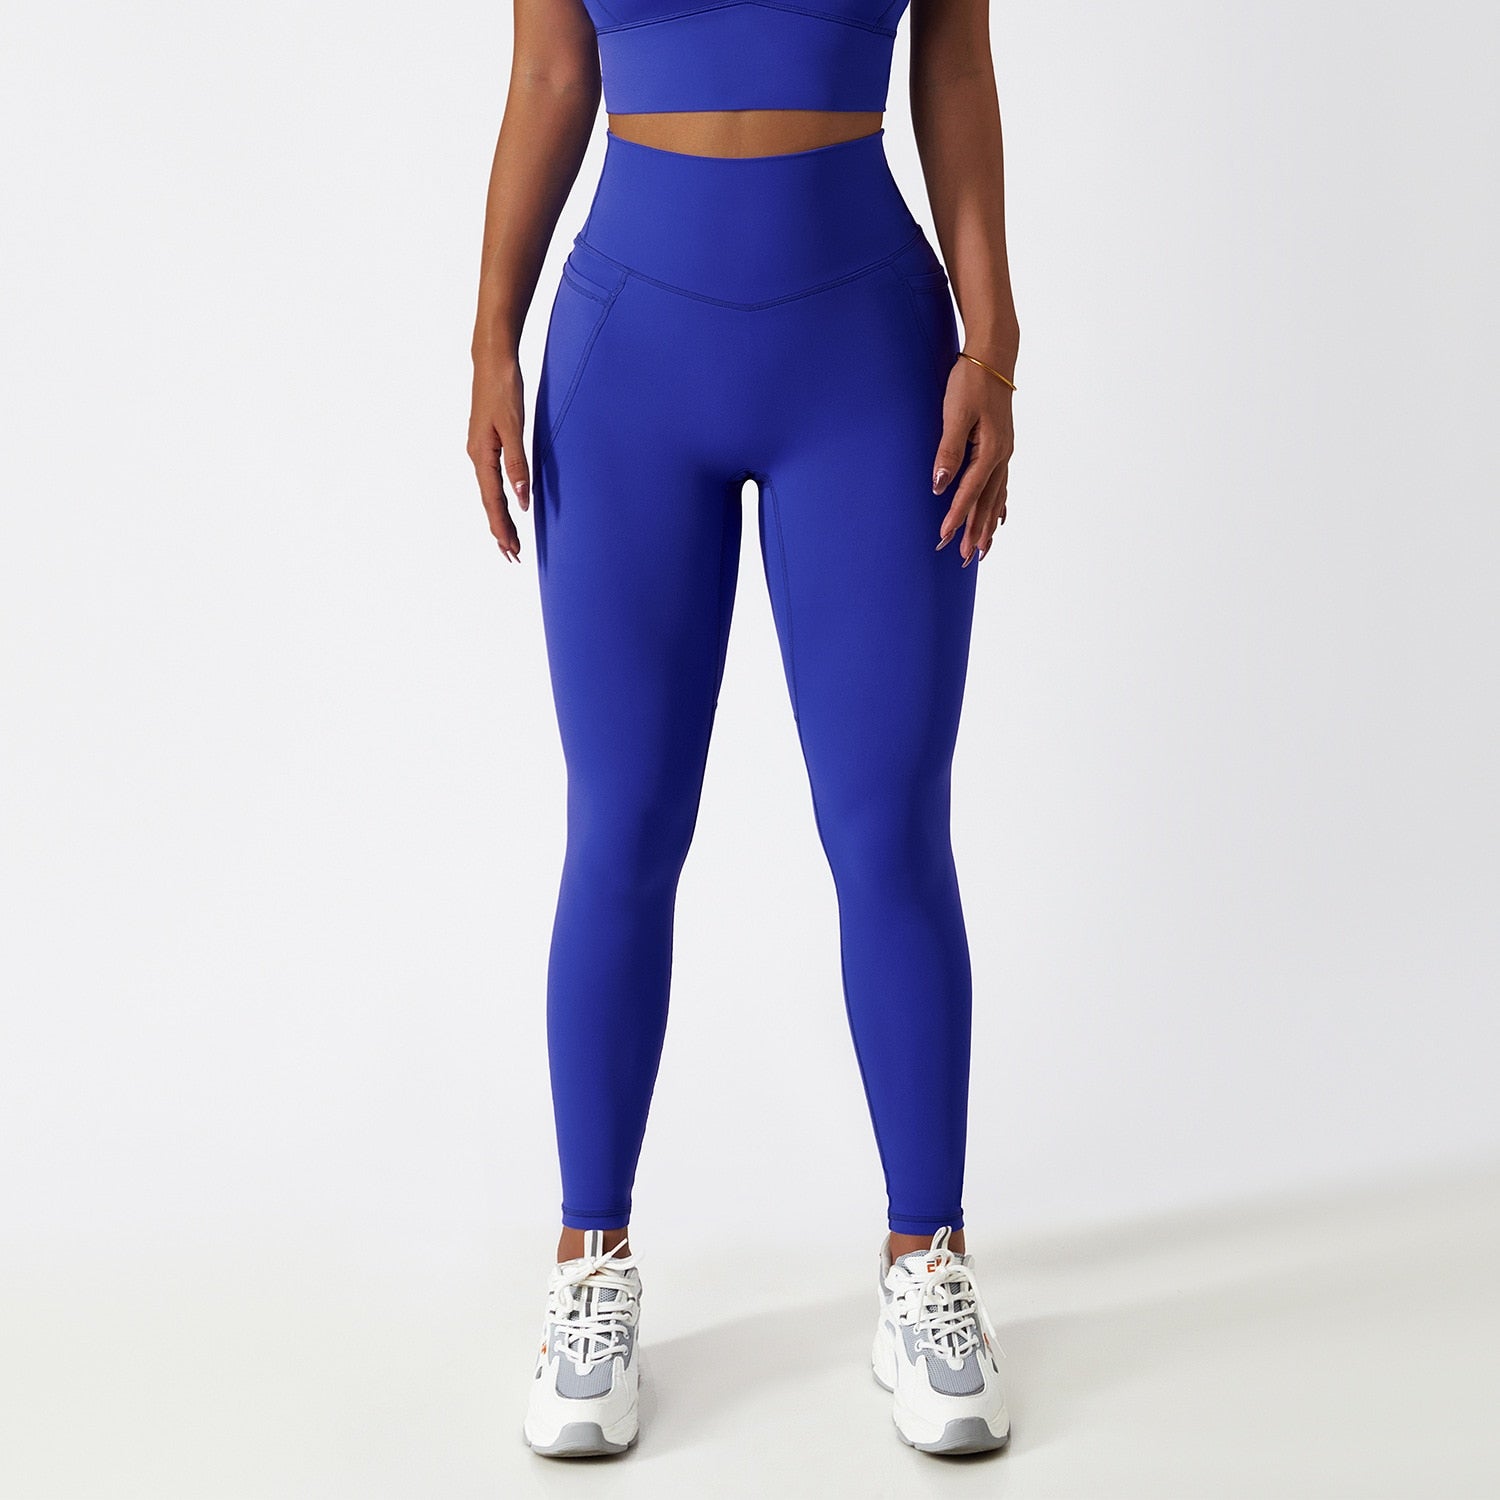 Women's Solid Blue Seamless High Waisted Yoga Leggings With Pockets